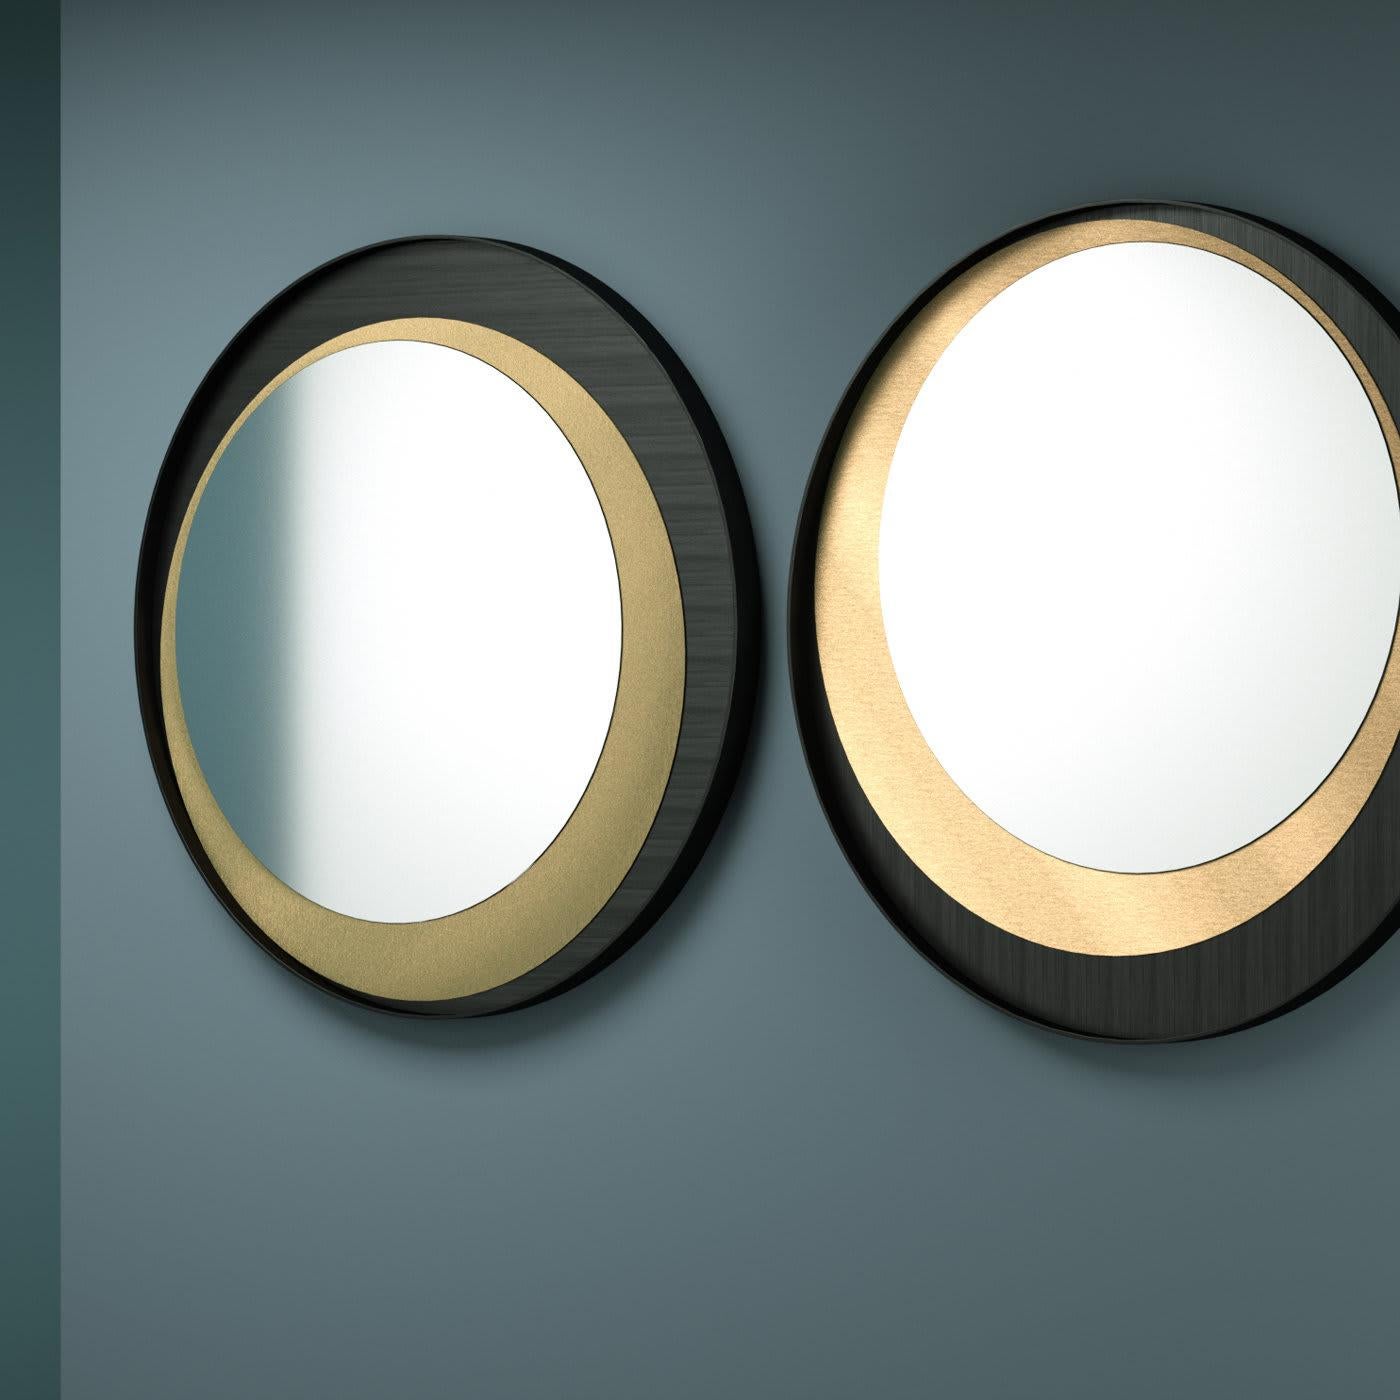 In this elegant wall mirror, a single round metal sheet finished in black frames a second round metal insert that contains the mirror. This striking overlap results in an iconic design that can be displayed in four different ways, thanks to the four